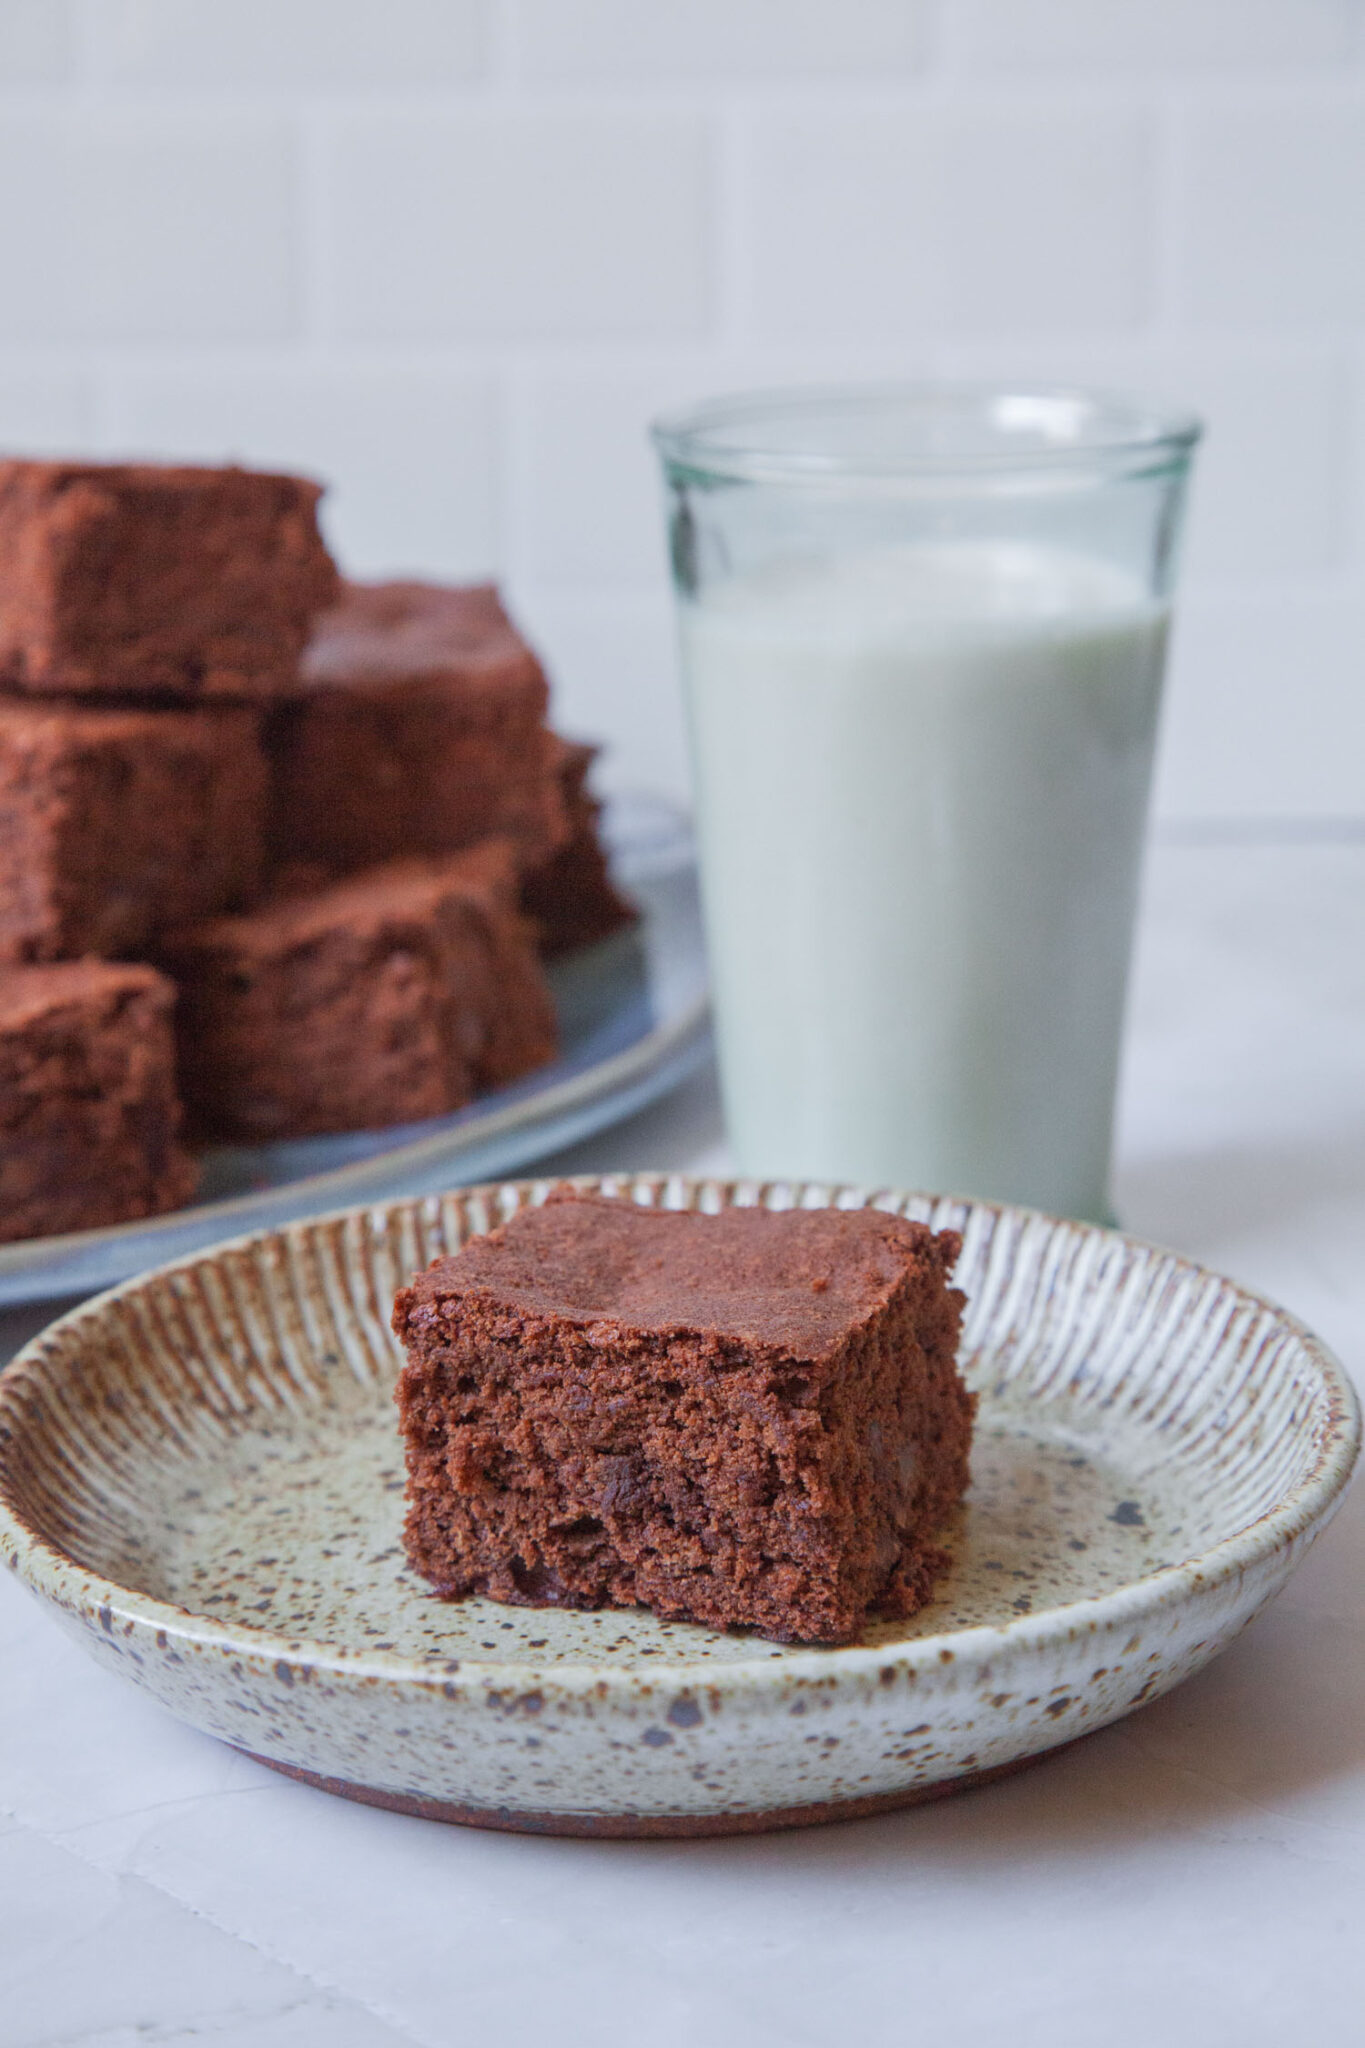 A cakey brownie sitting on a small plate, with a glass of milk and more brownies behind it.